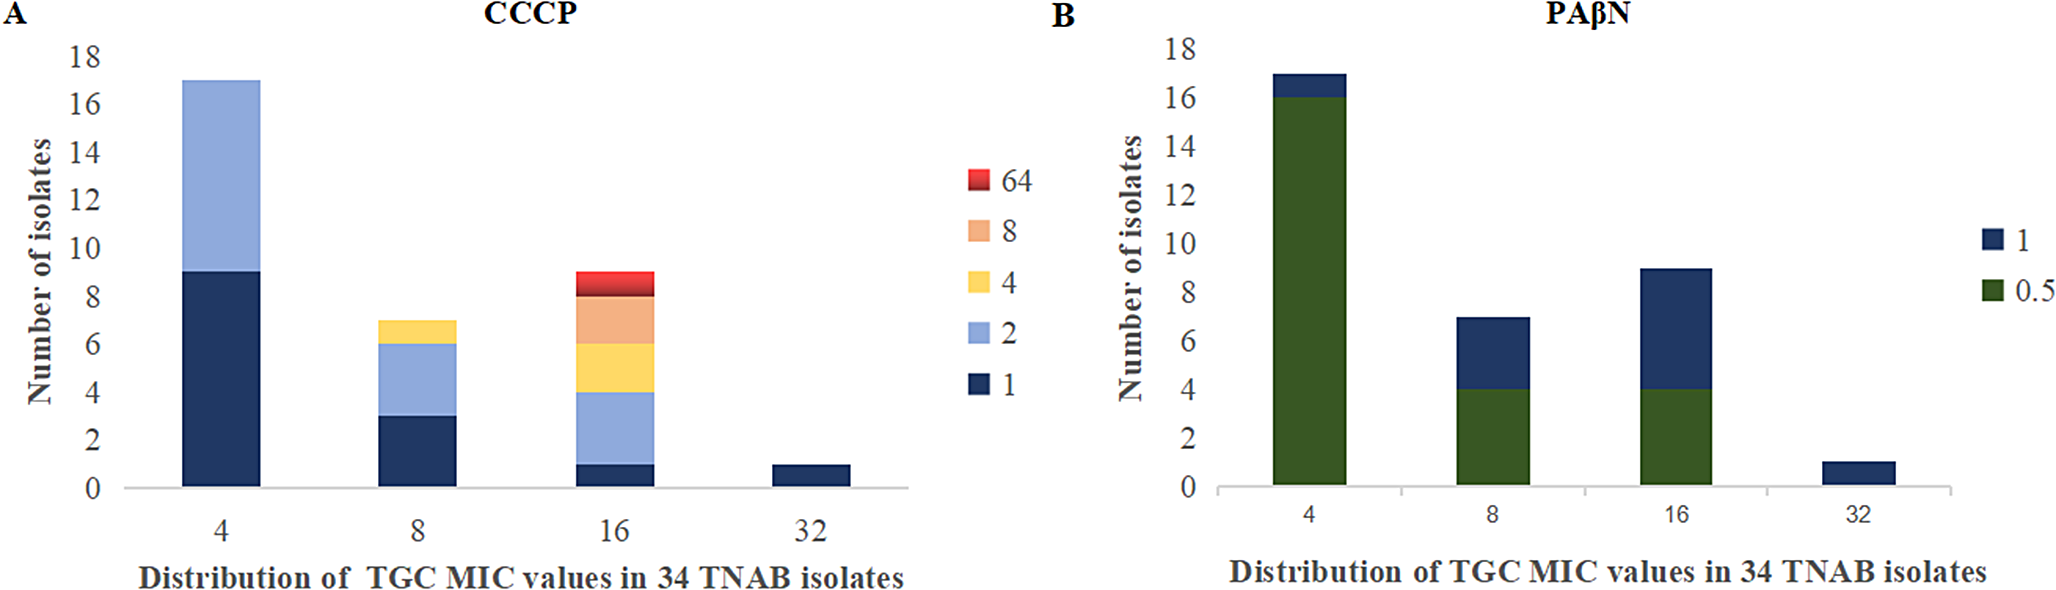 Molecular epidemiology and resistance mechanisms of tigecycline-non-susceptible Acinetobacter baumannii isolated from a tertiary care hospital in Chongqing, China